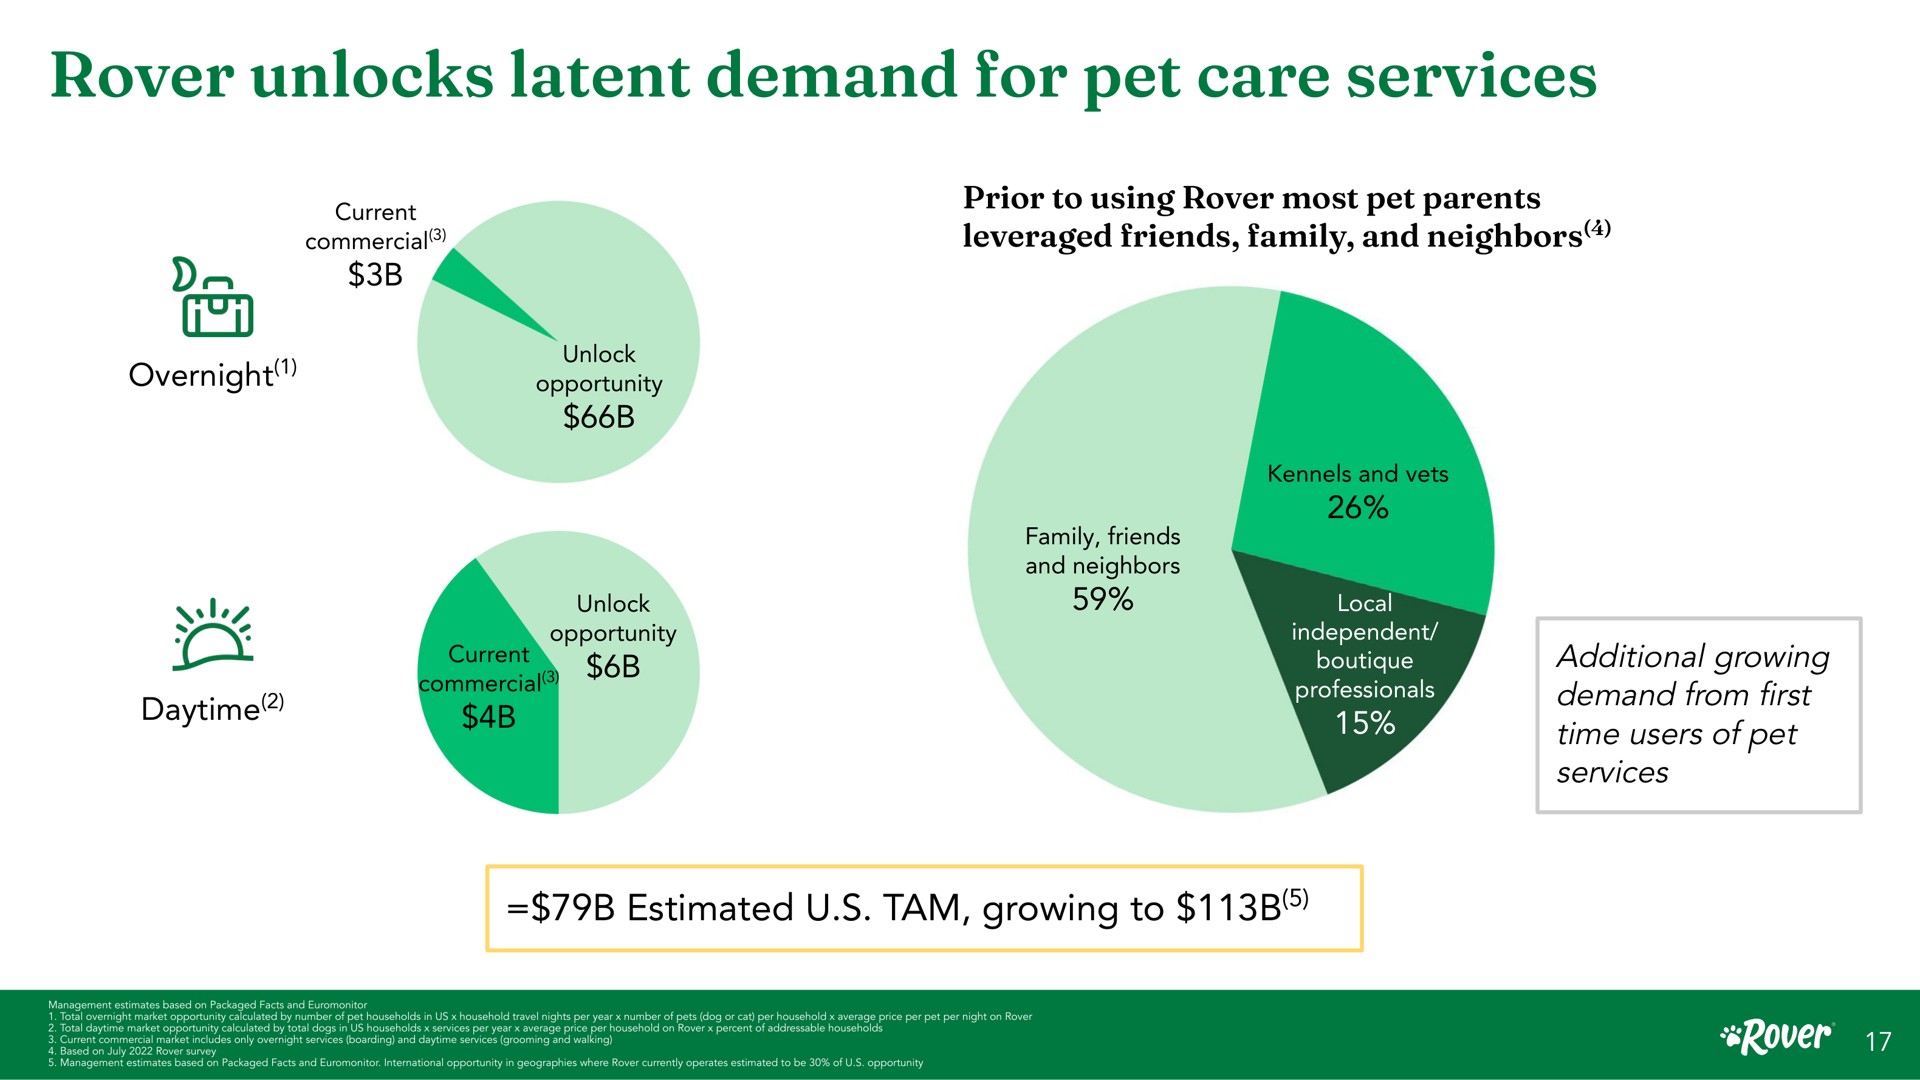 rover unlocks latent demand for pet care services current commercial overnight elegy daytime unlock opportunity unlock opportunity prior to using most parents leveraged friends family and neighbors family friends and neighbors local independent else additional growing from first time users of estimated tam growing to | Rover